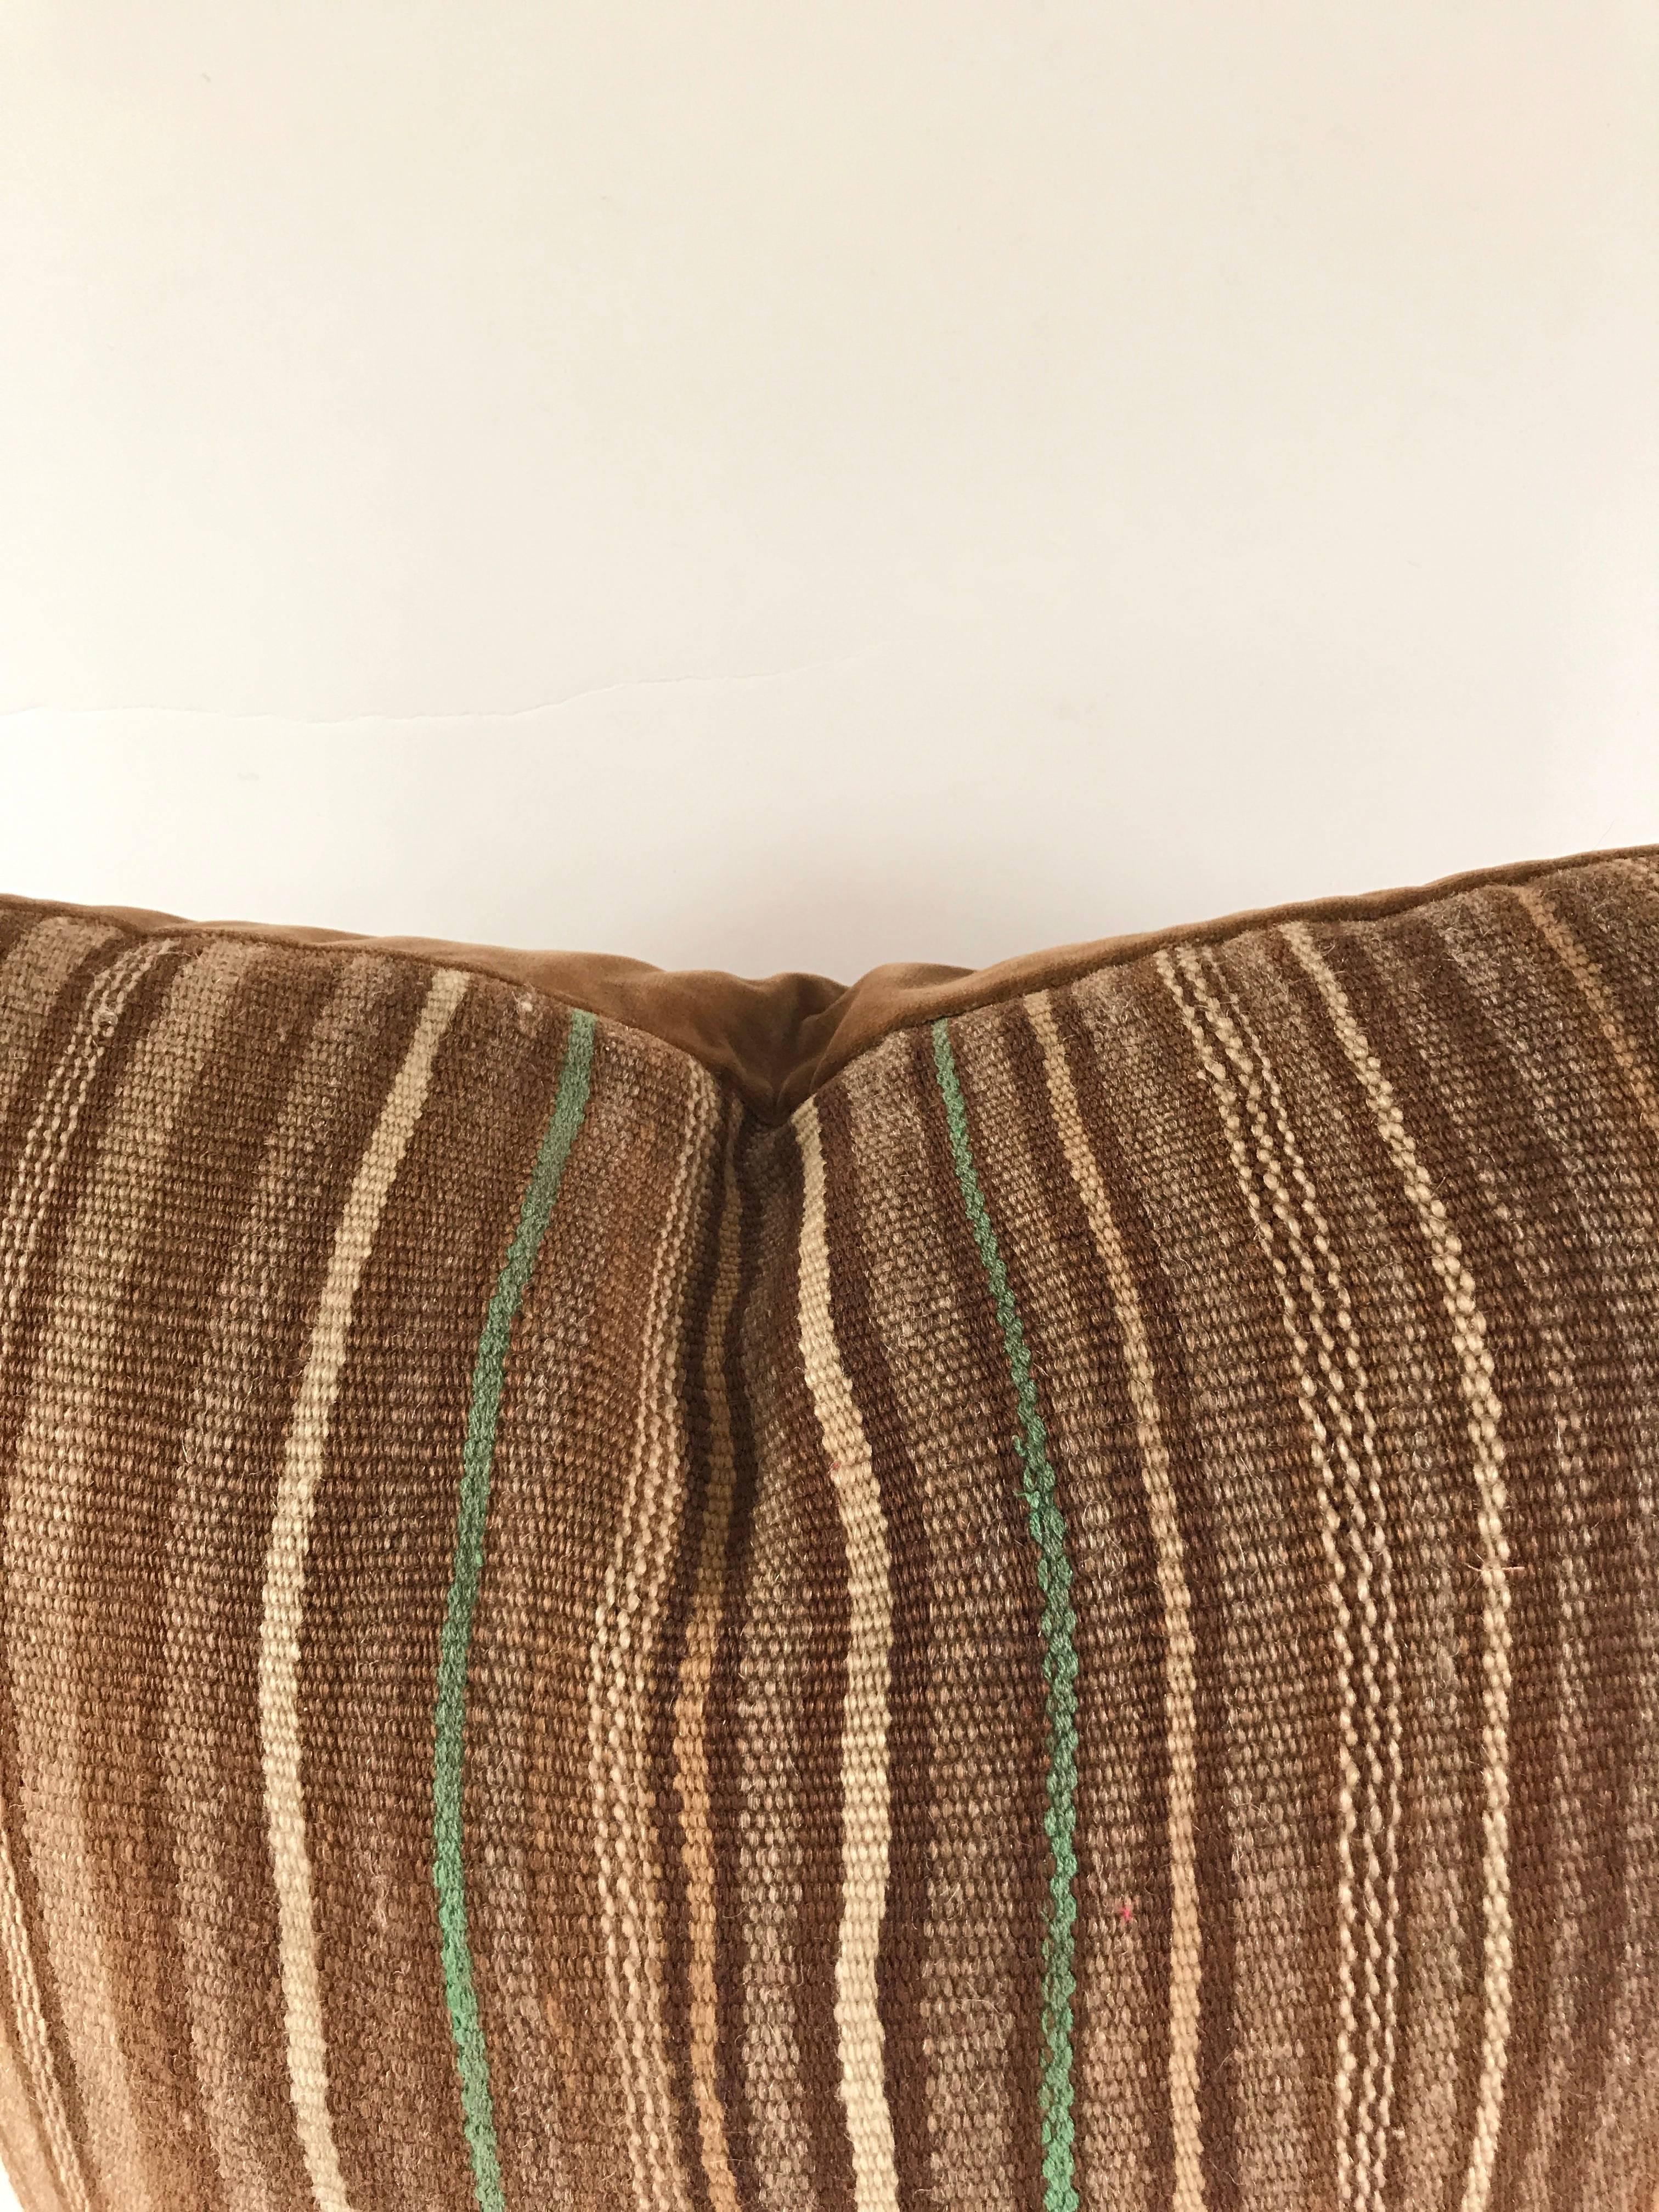 Custom Pillow Cut from a Vintage Hand-Loomed Wool Moroccan Berber Blanket In Good Condition For Sale In Glen Ellyn, IL